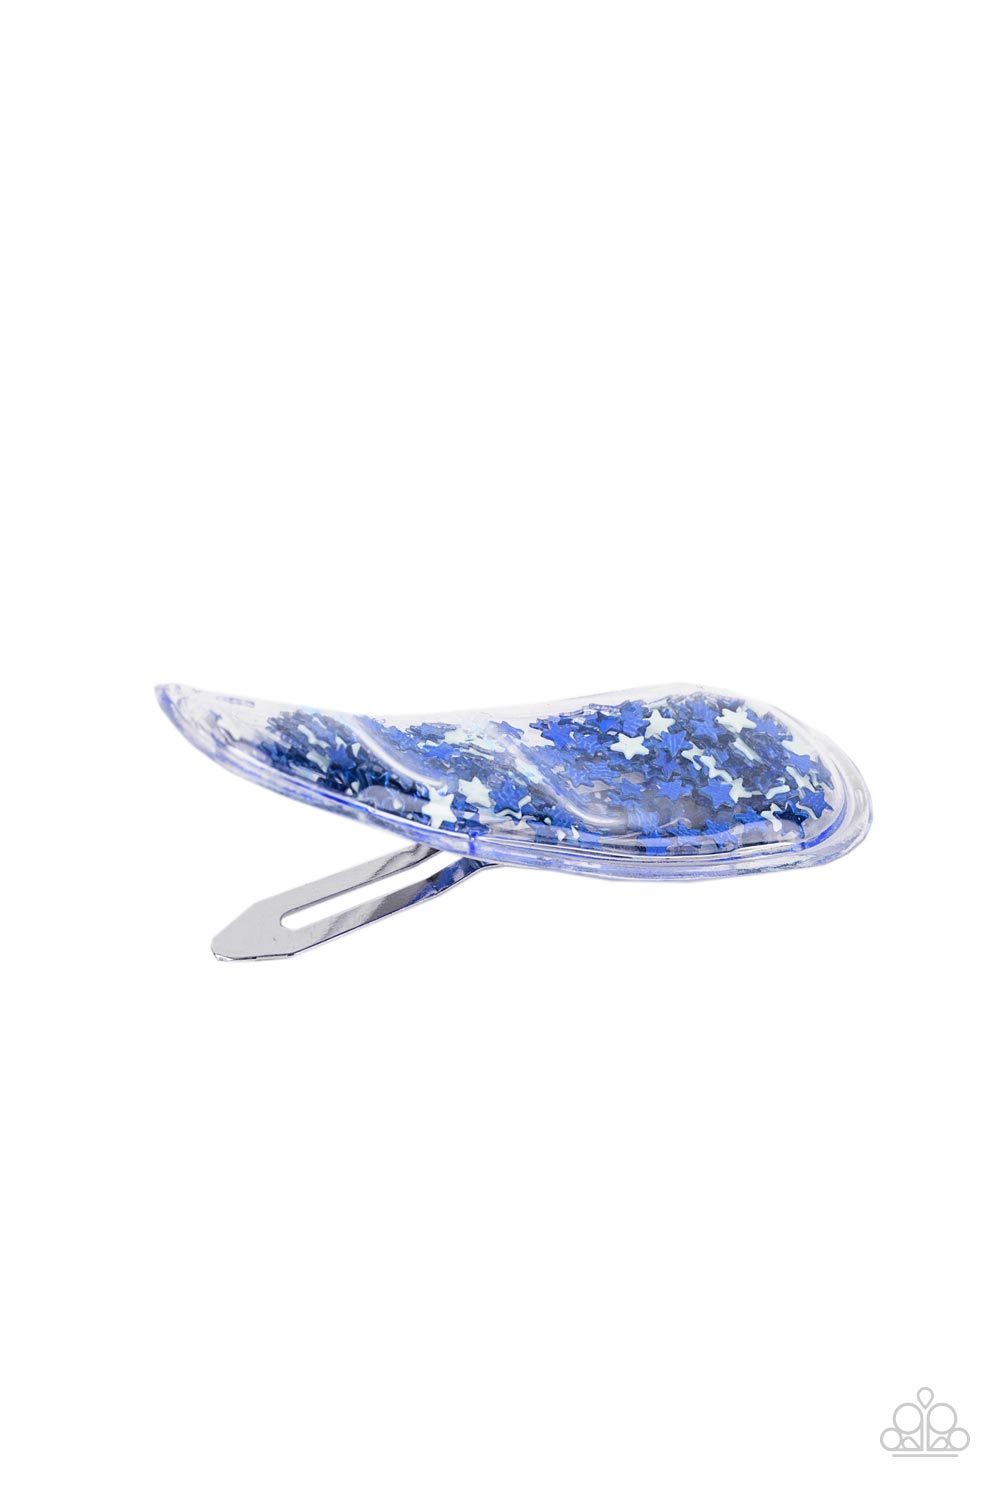 Oh, My Stars and Stripes Blue Hair Clip - Paparazzi Accessories  A stellar collection of shimmery white and blue stars sparkle back and forth inside a clear plastic frame, creating an eye-catching twinkle. Features a standard snap hair clip on the back.  Sold as one individual hair clip.